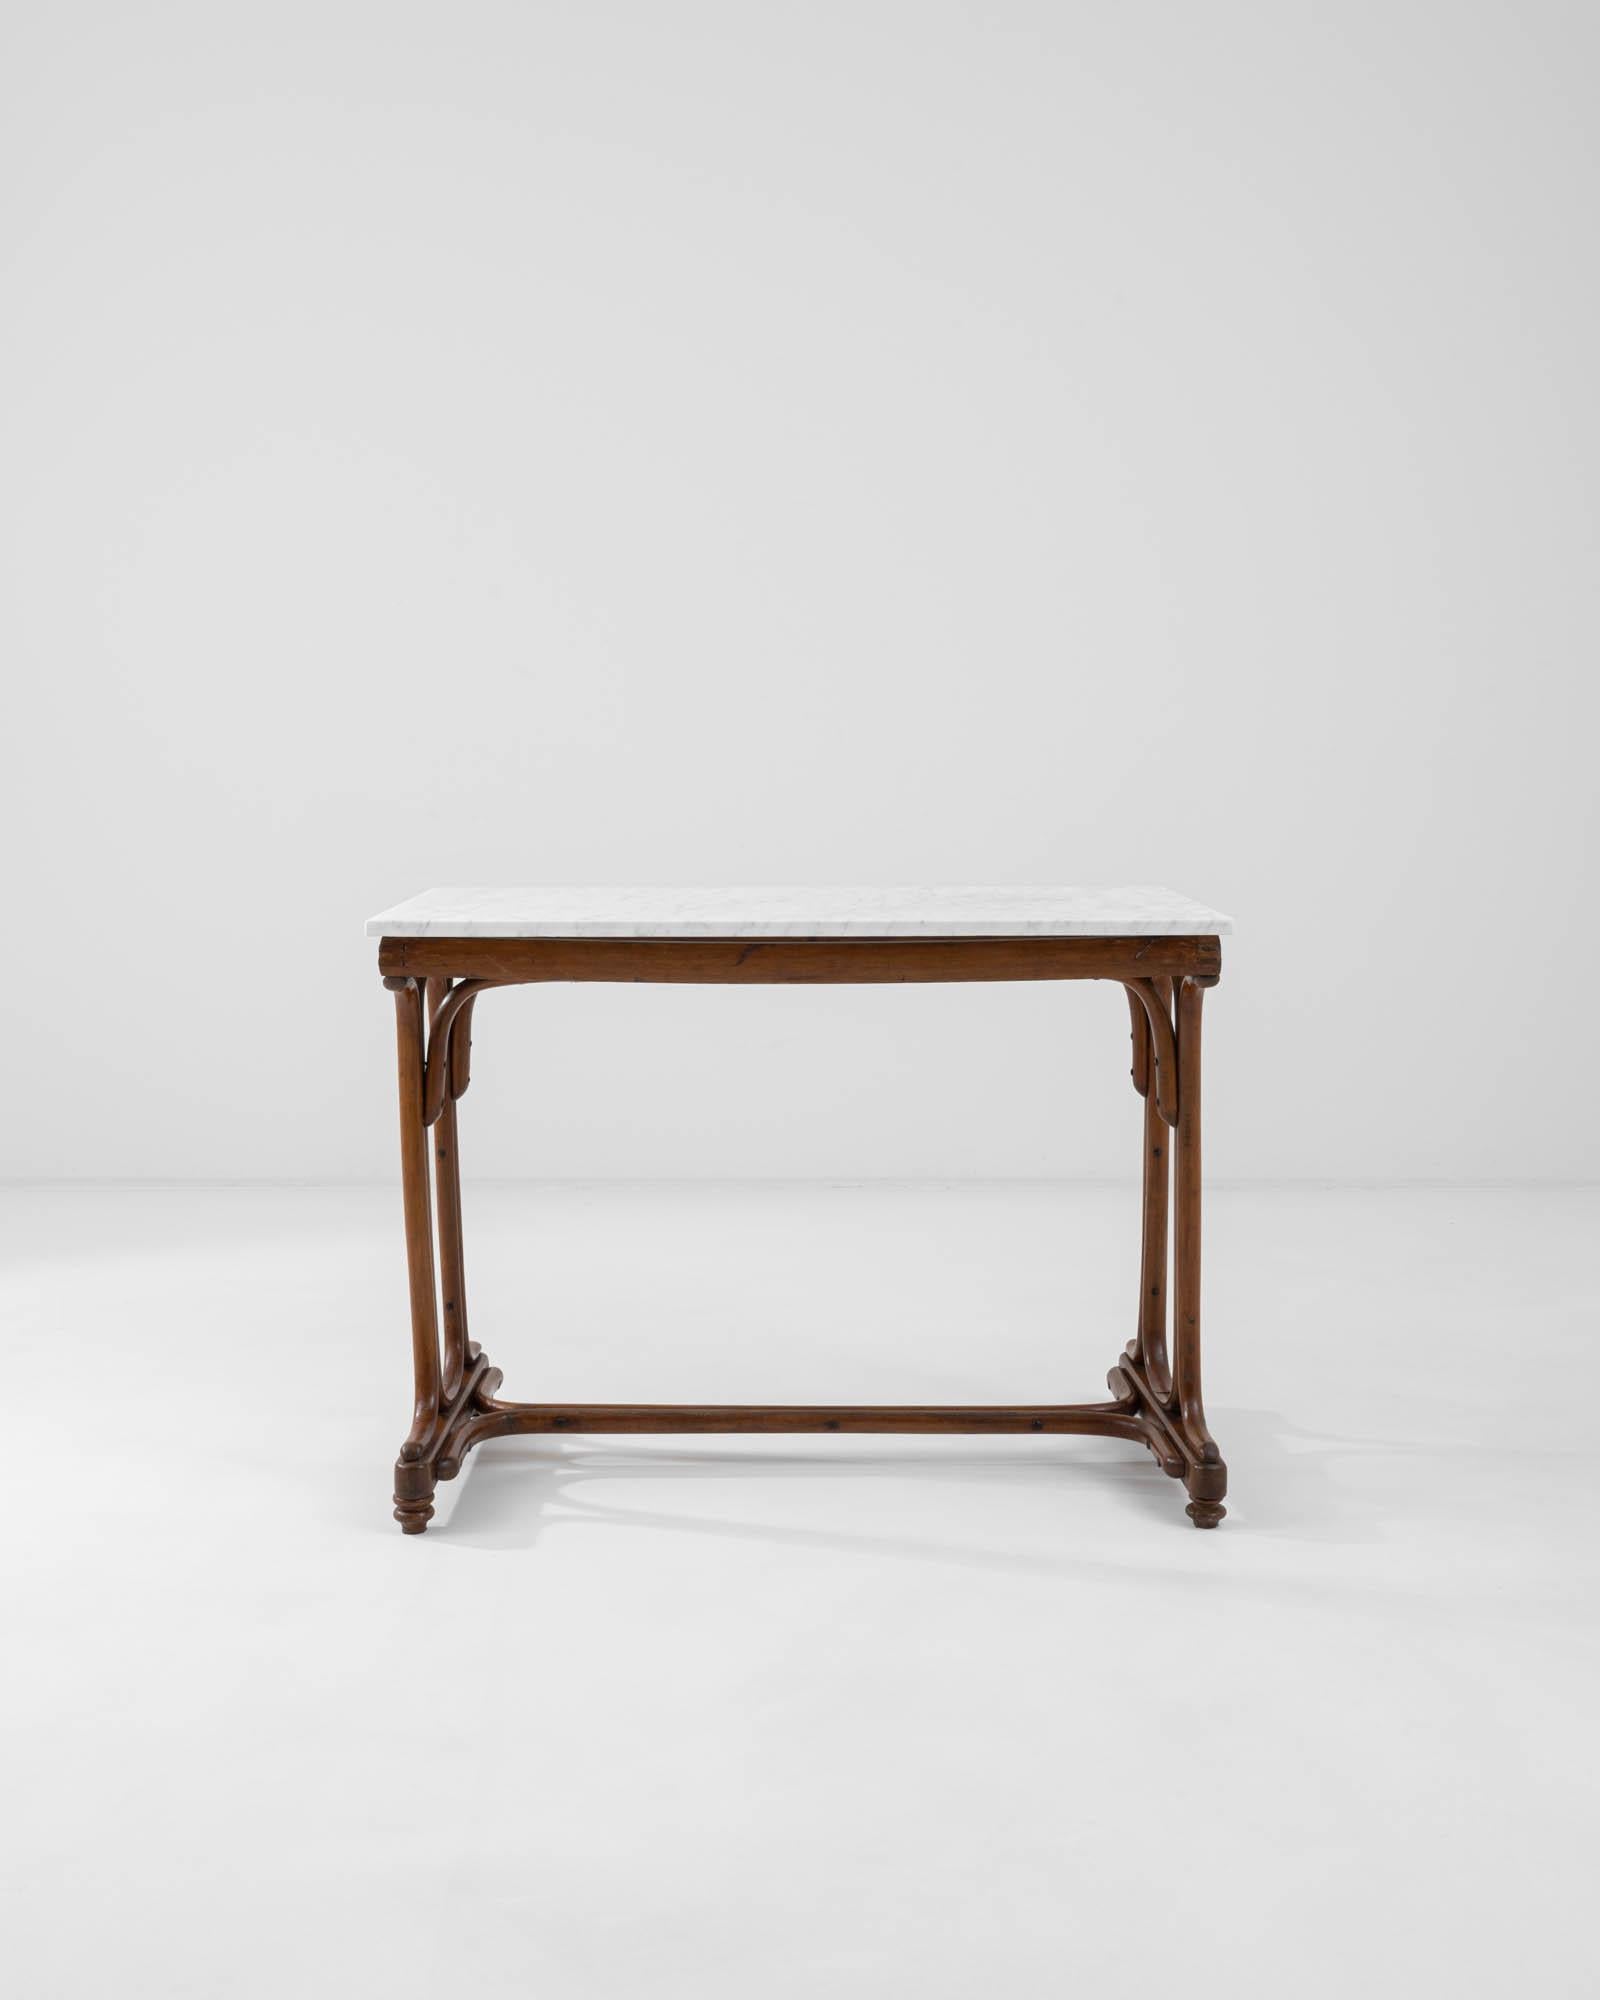 A wooden side table with a marble top created in 1900s France. Charmingly rustic, yet with a surprisingly modern flair, this charming bistro table blends aesthetics to an eye-pleasing effect. Carefully steam-bent wood harkens to the ‘Thonet’ style,